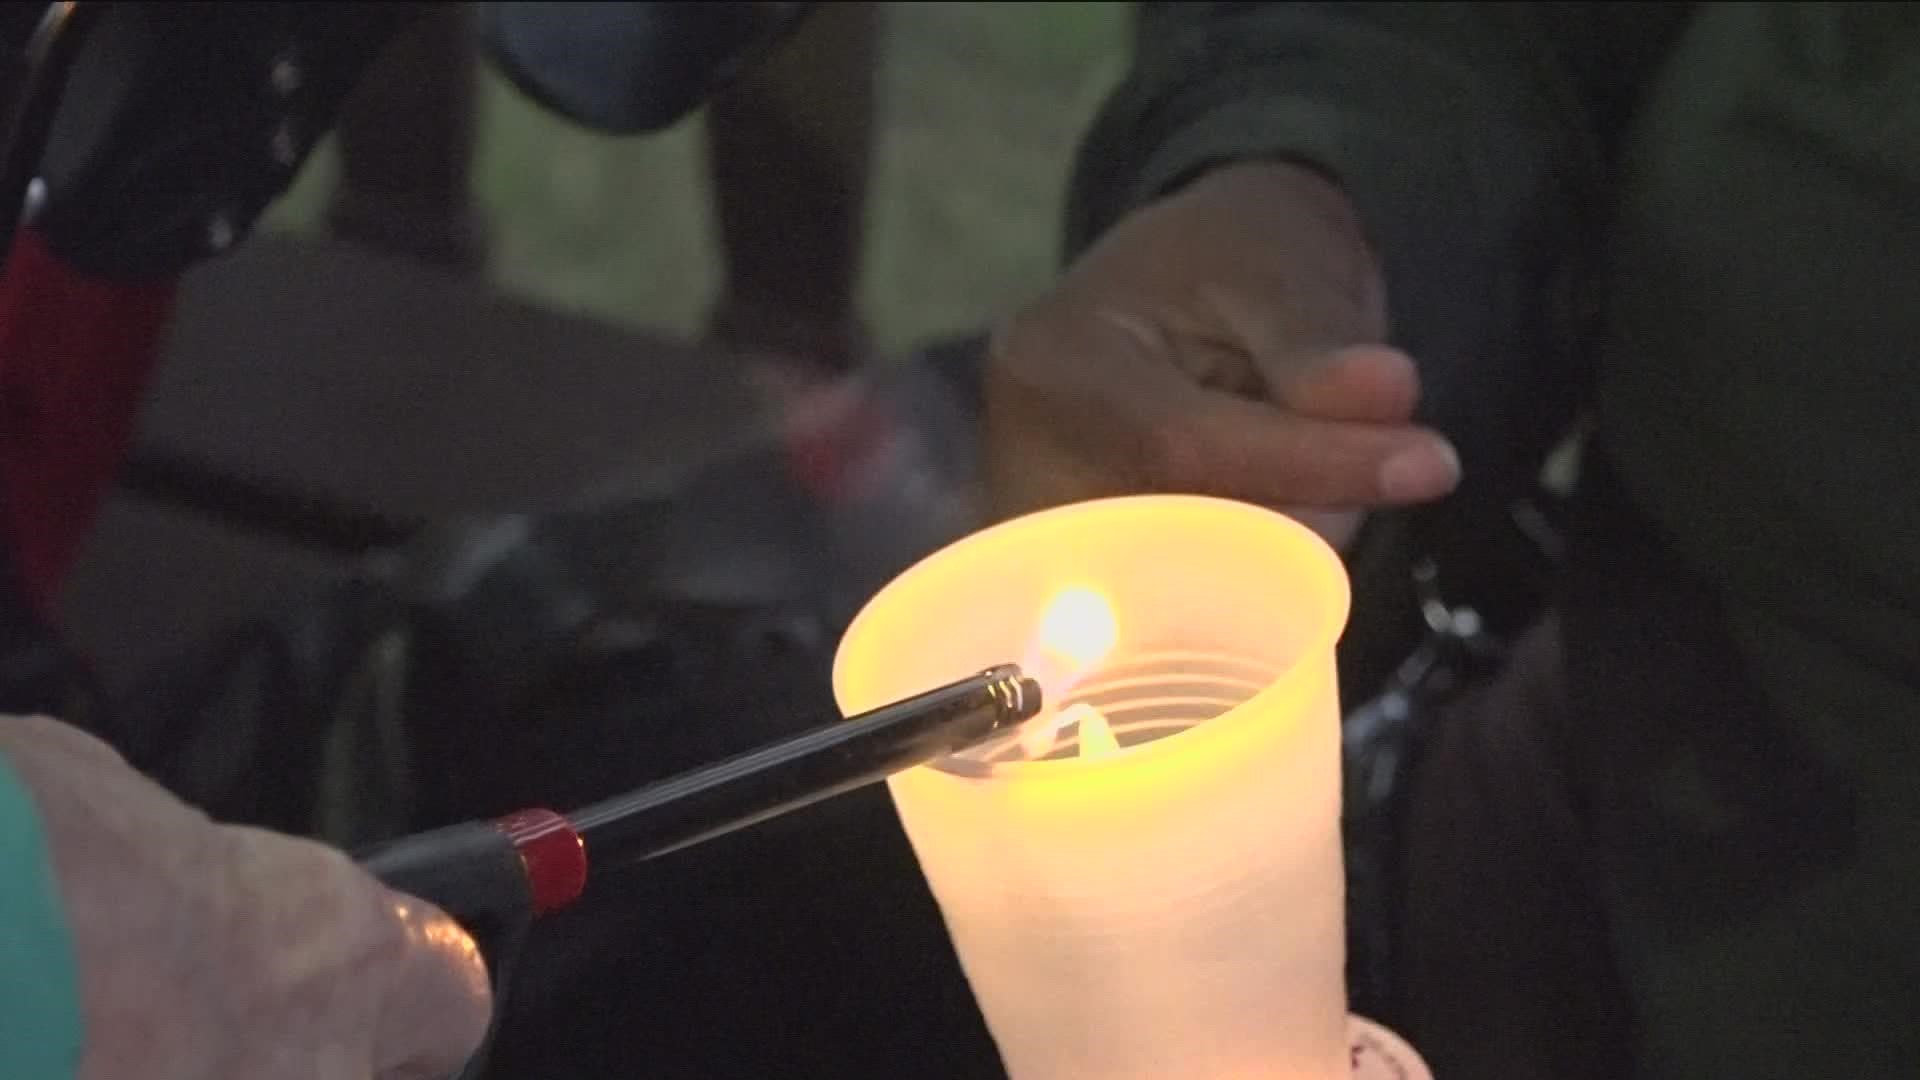 September is National Ovarian Cancer Awareness month. The Ovarian Cancer Connection, OCC, hosted a candlelight vigil to honor those who passed from ovarian cancer.